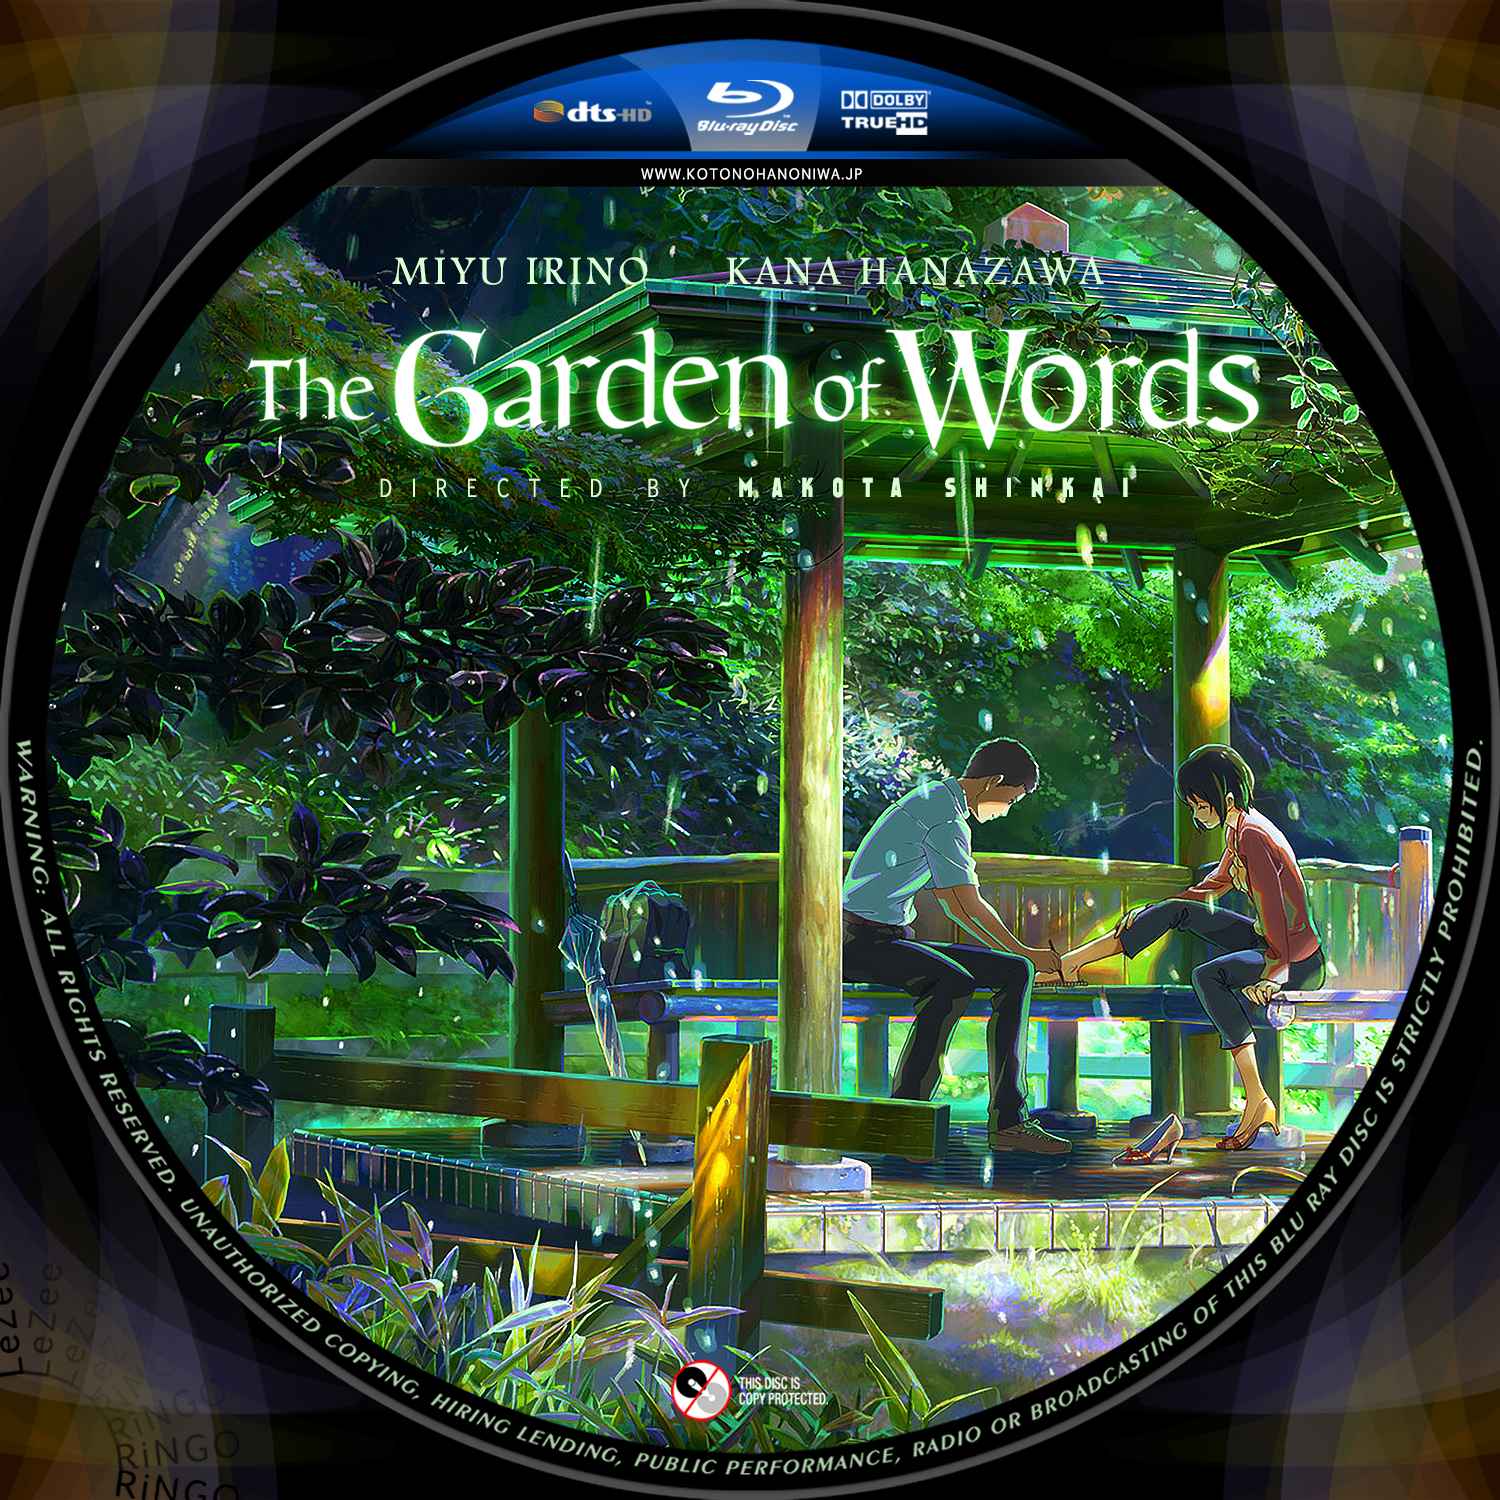 Covers Box Sk The Garden Of Words High Quality Dvd Blueray